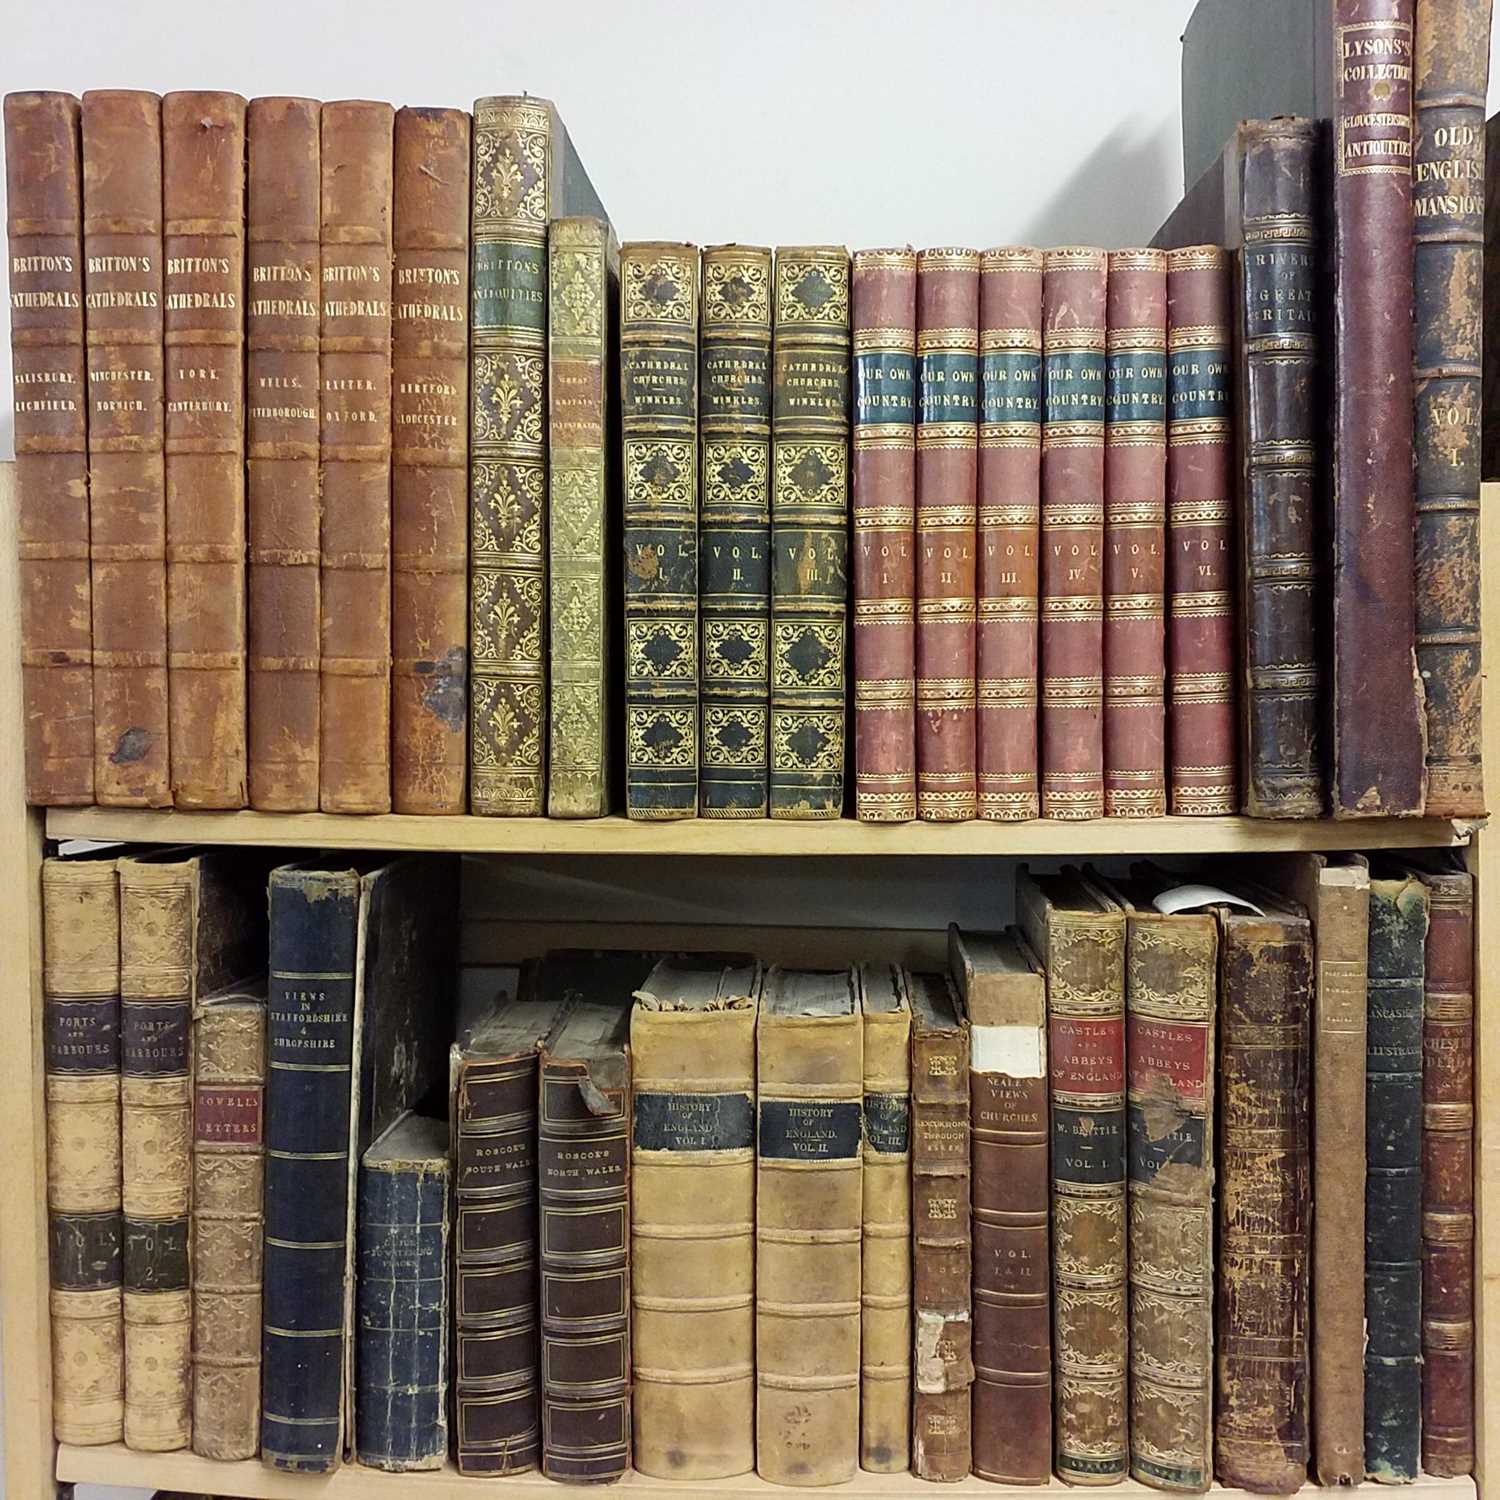 Lot 734 - British Topography. A large collection of mostly 19th century British topography & plate books